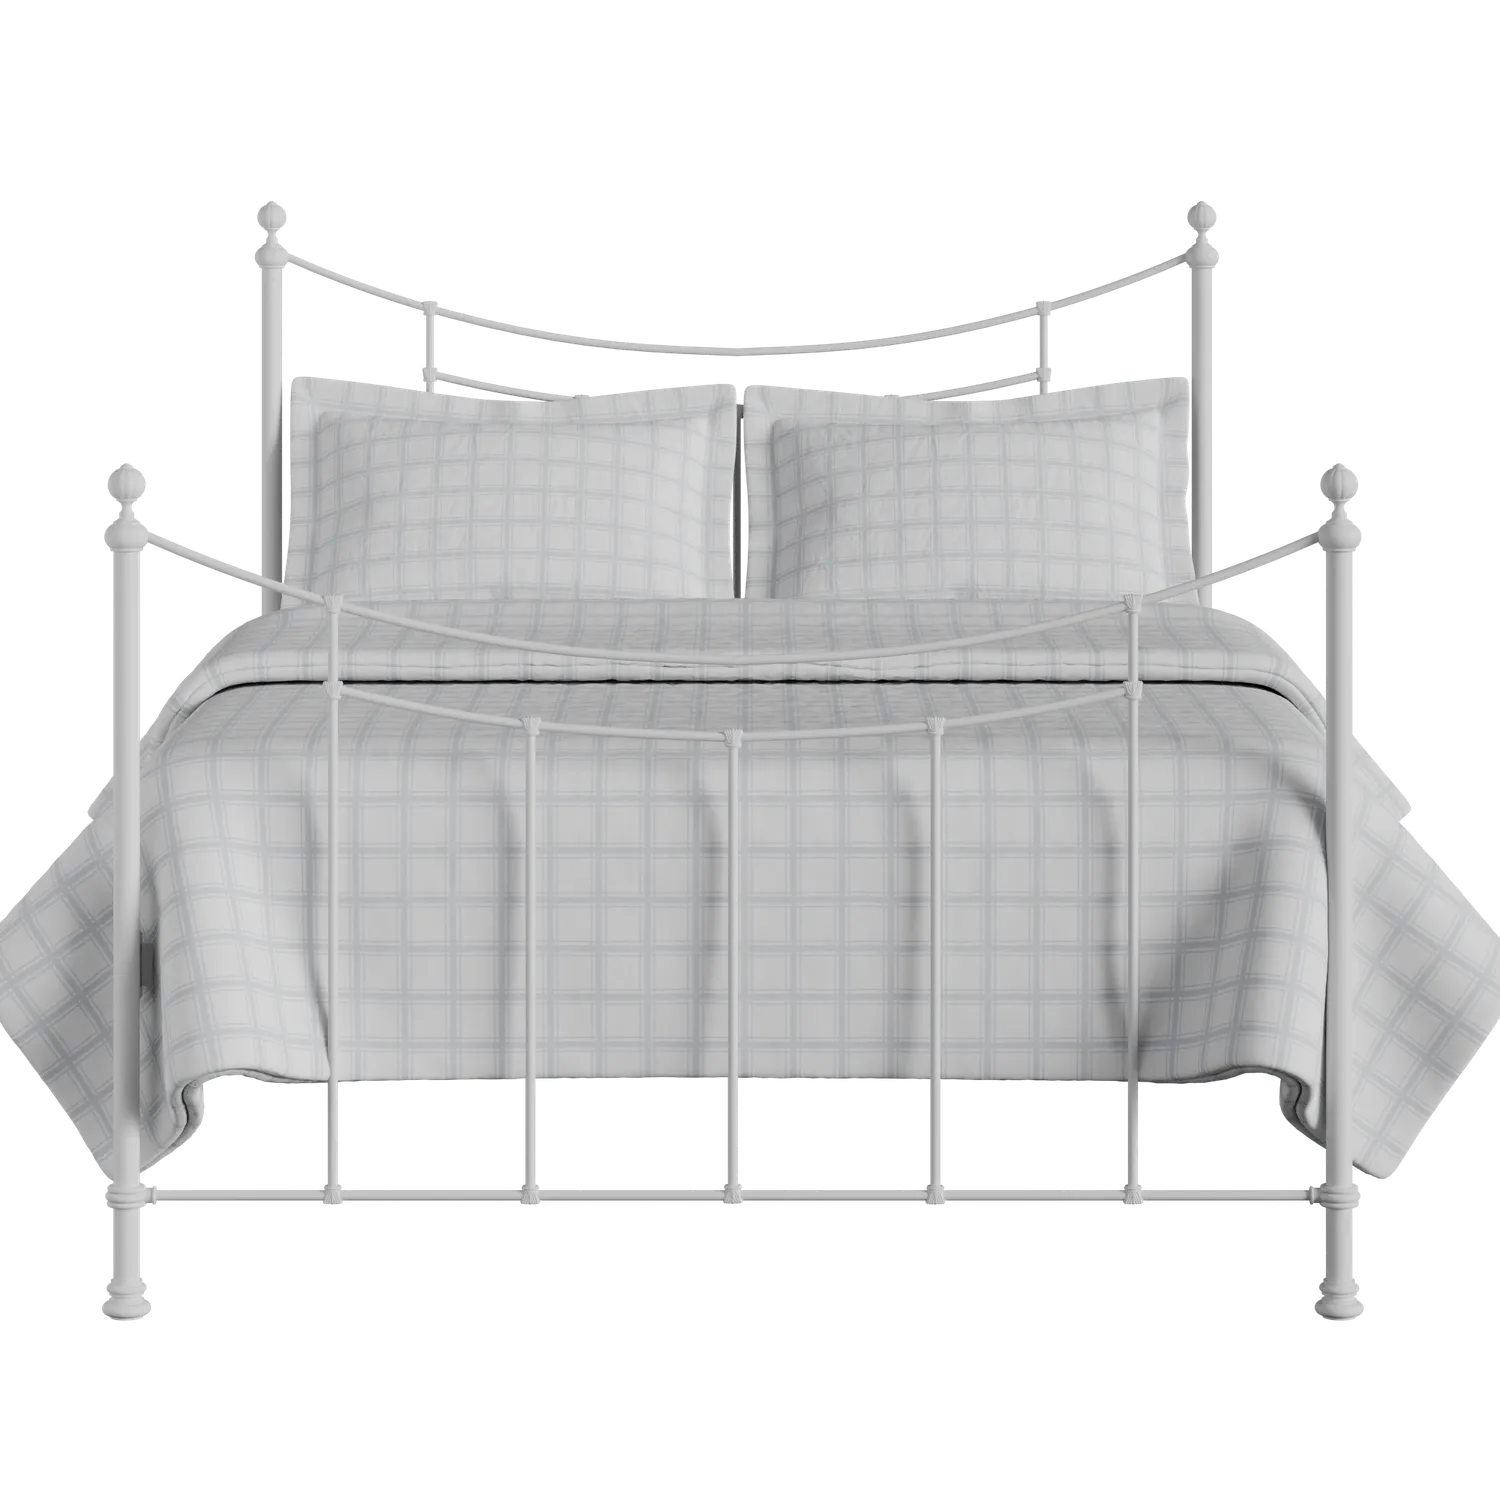 Winchester iron/metal bed in white